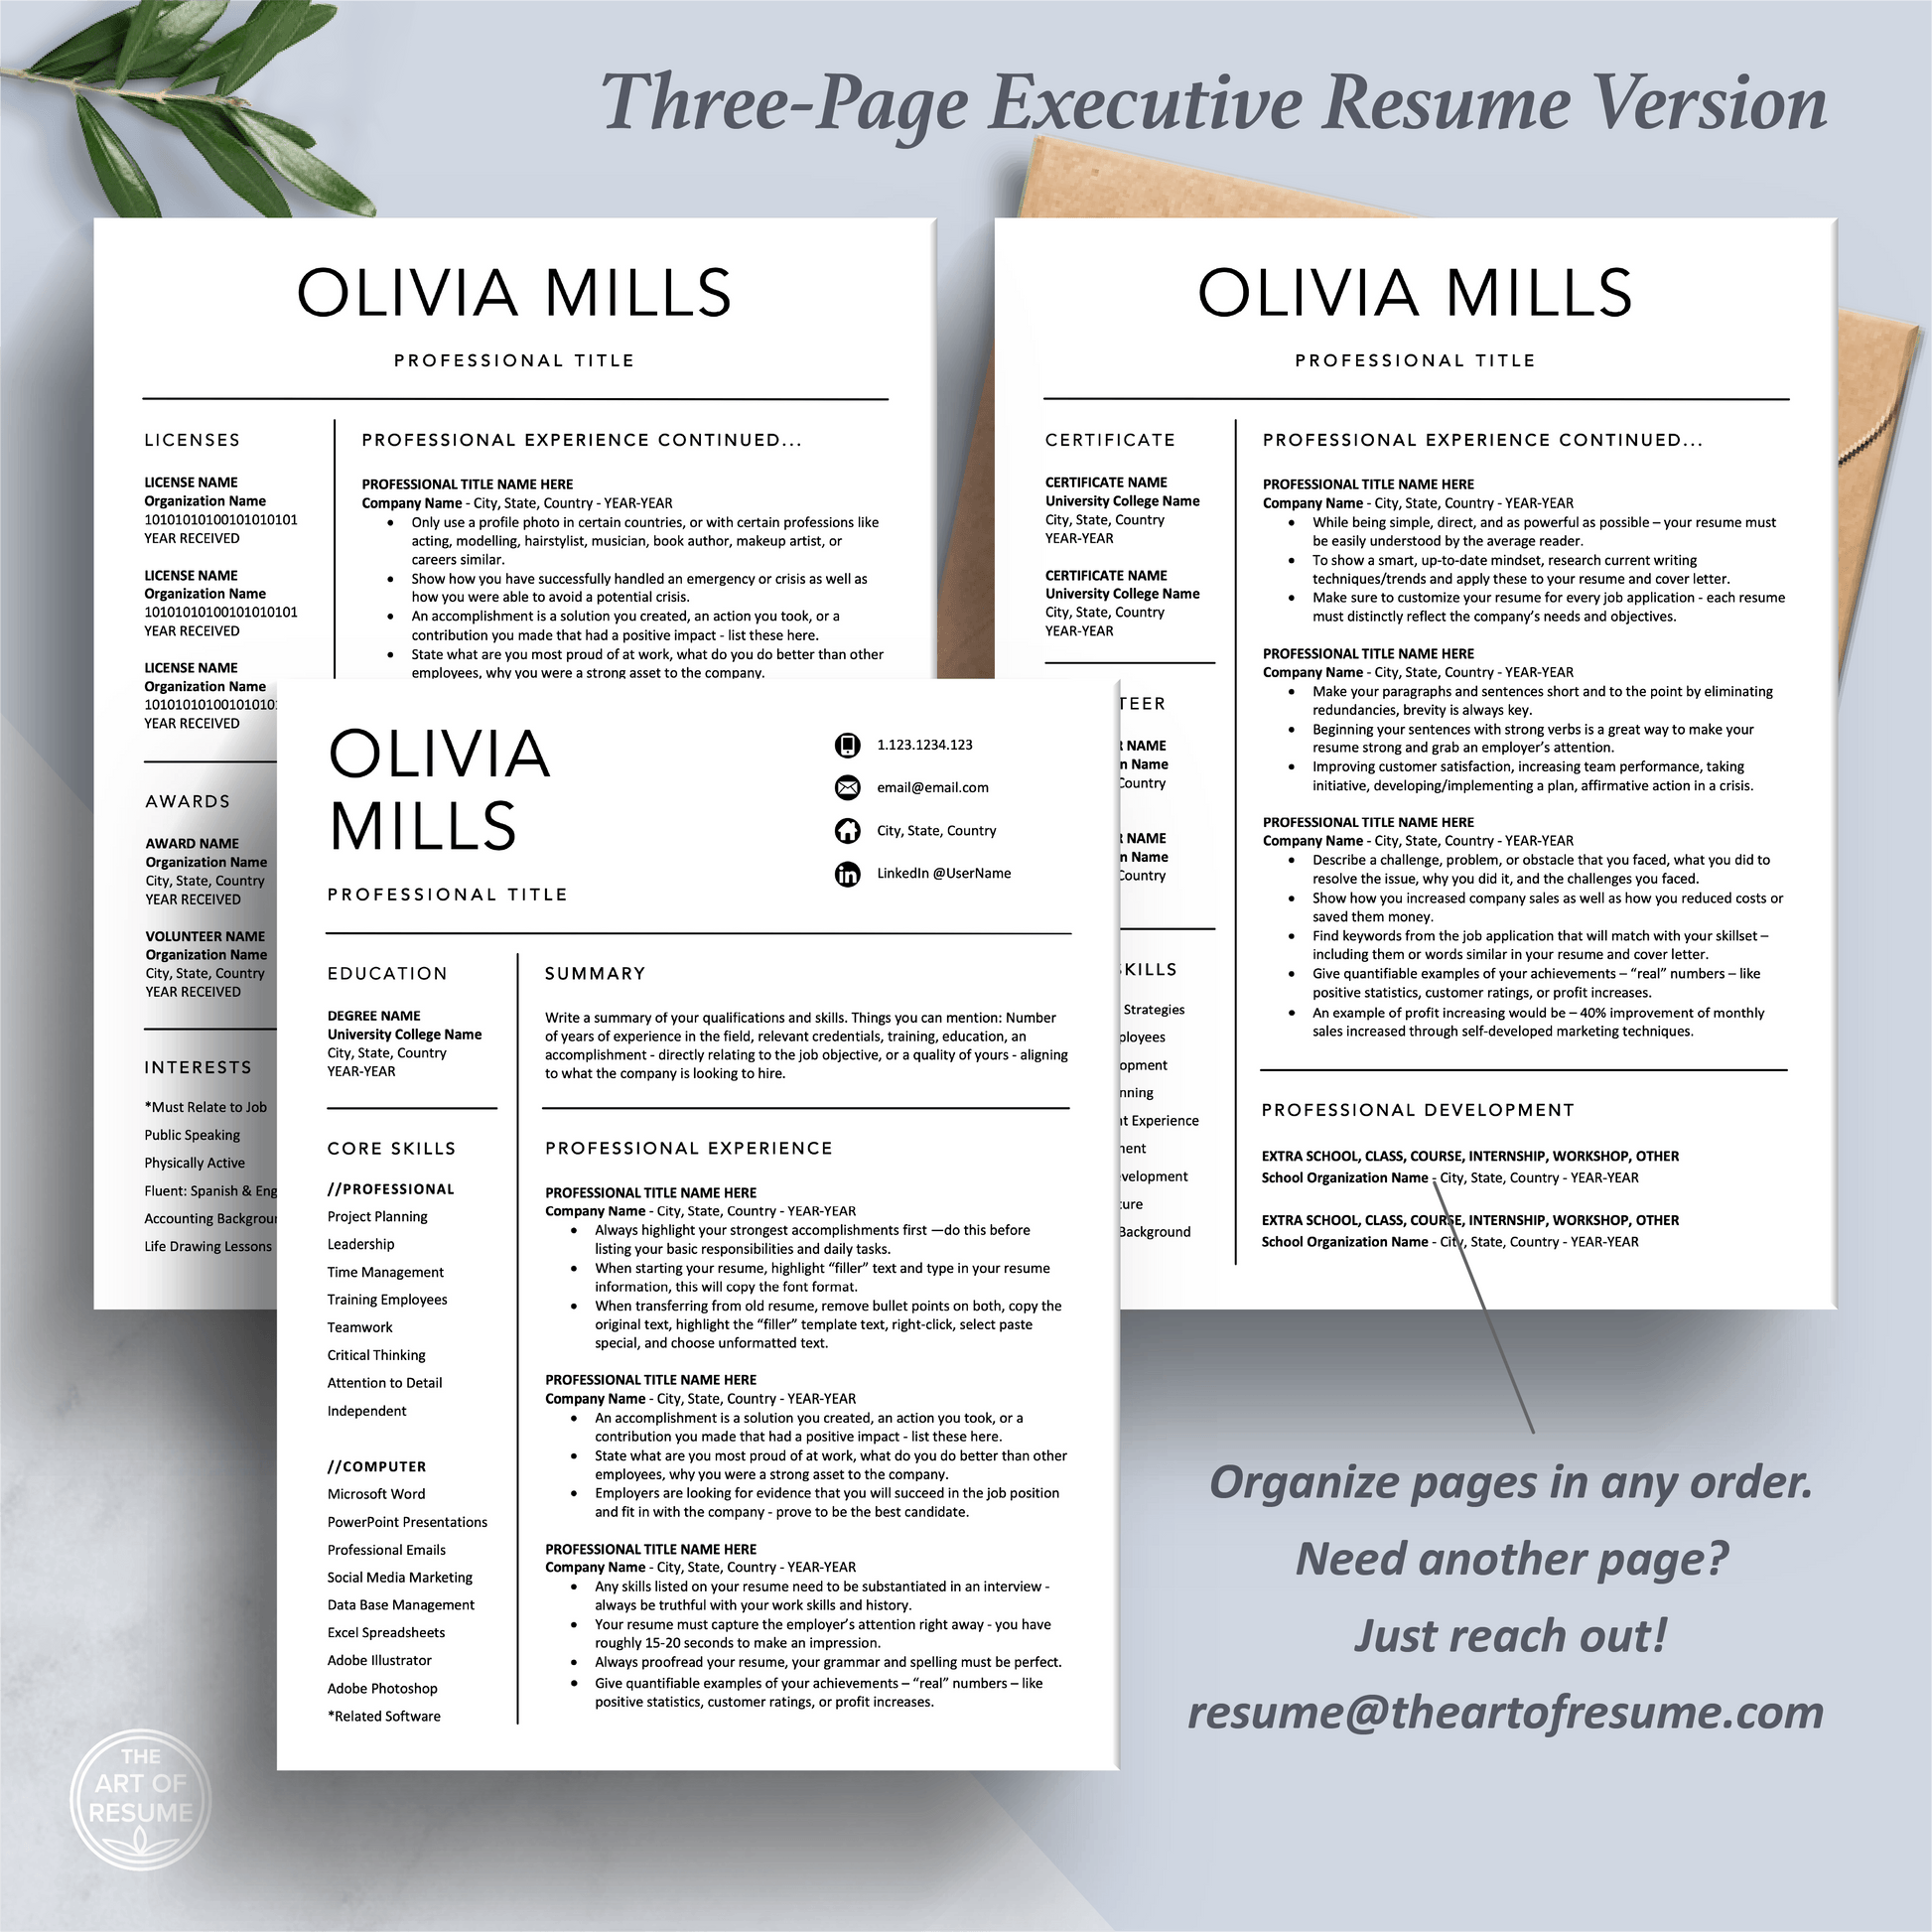 The Art of Resume Templates | Three-Page Professional Simple Executive C-Suite Level  Resume CV Template Format | Curriculum Vitae